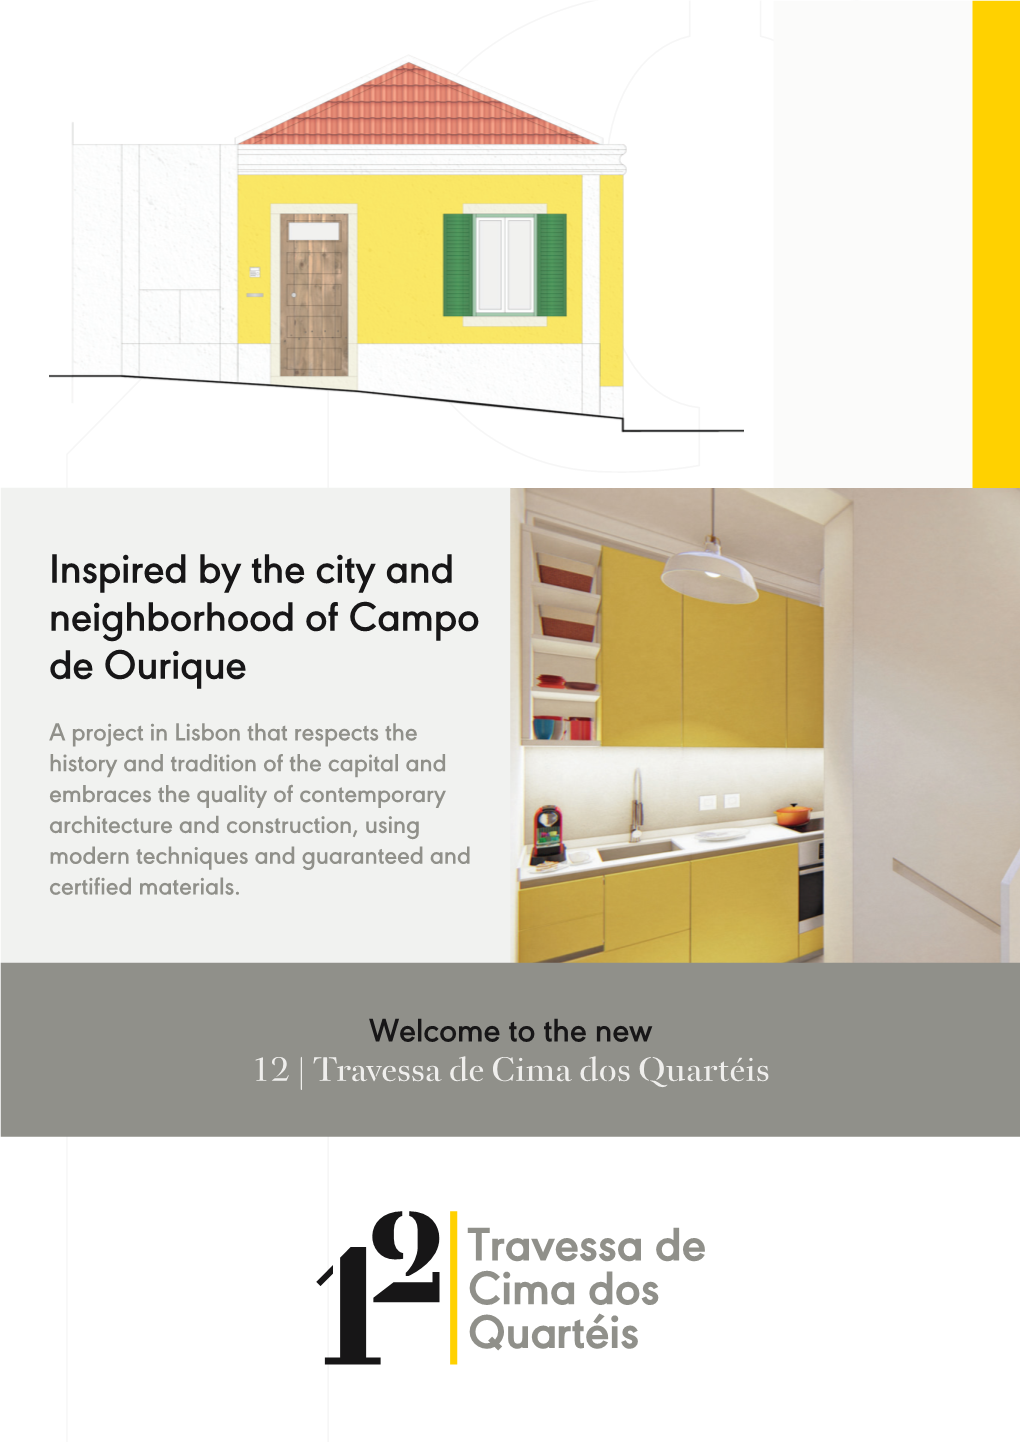 Inspired by the City and Neighborhood of Campo De Ourique